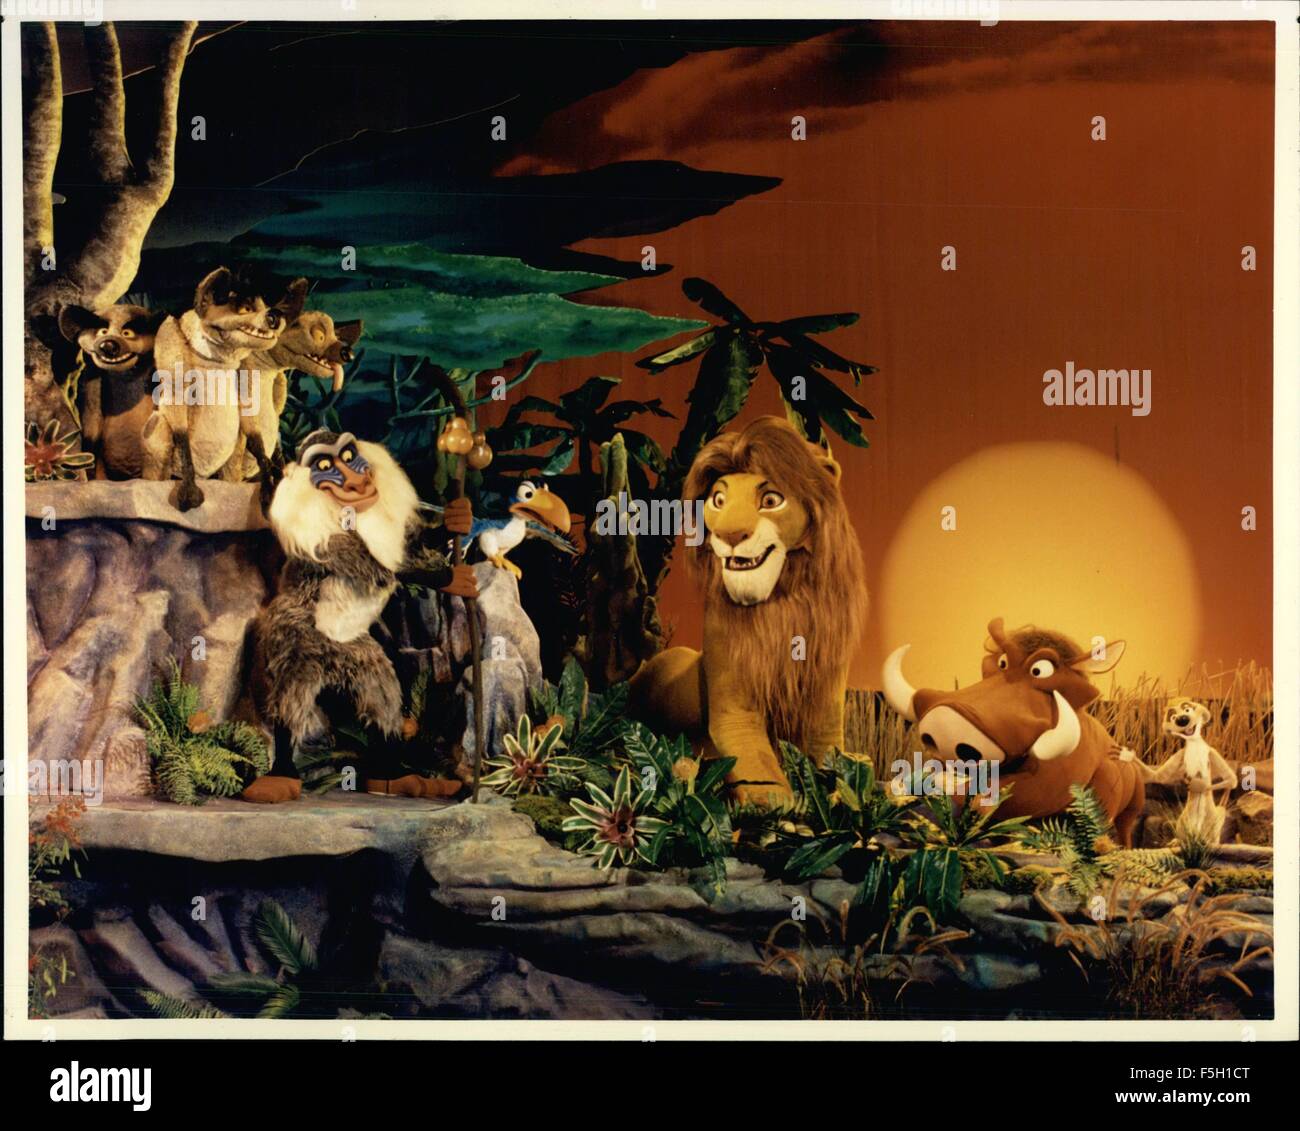 1994 - Lion King And His Cast Simba is joined by a host of characters who appear in ''The Legend of the Lion King'' stage show at the Magic Kingdom in the Walt Disney World Resort. The show features music and voices from the film in a three-dimensional extravaganza. Among Simba's supporting characters are Rafiki, the wise baboon; Zazu, a horn-bill and the king's advisor; whacky pals Timon and Pumbaa, a meerkat and warthog; and the nefarious trio of hyenas Shenzi, Banzai and Ed. © Keystone Pictures USA/ZUMAPRESS.com/Alamy Live News Stock Photo